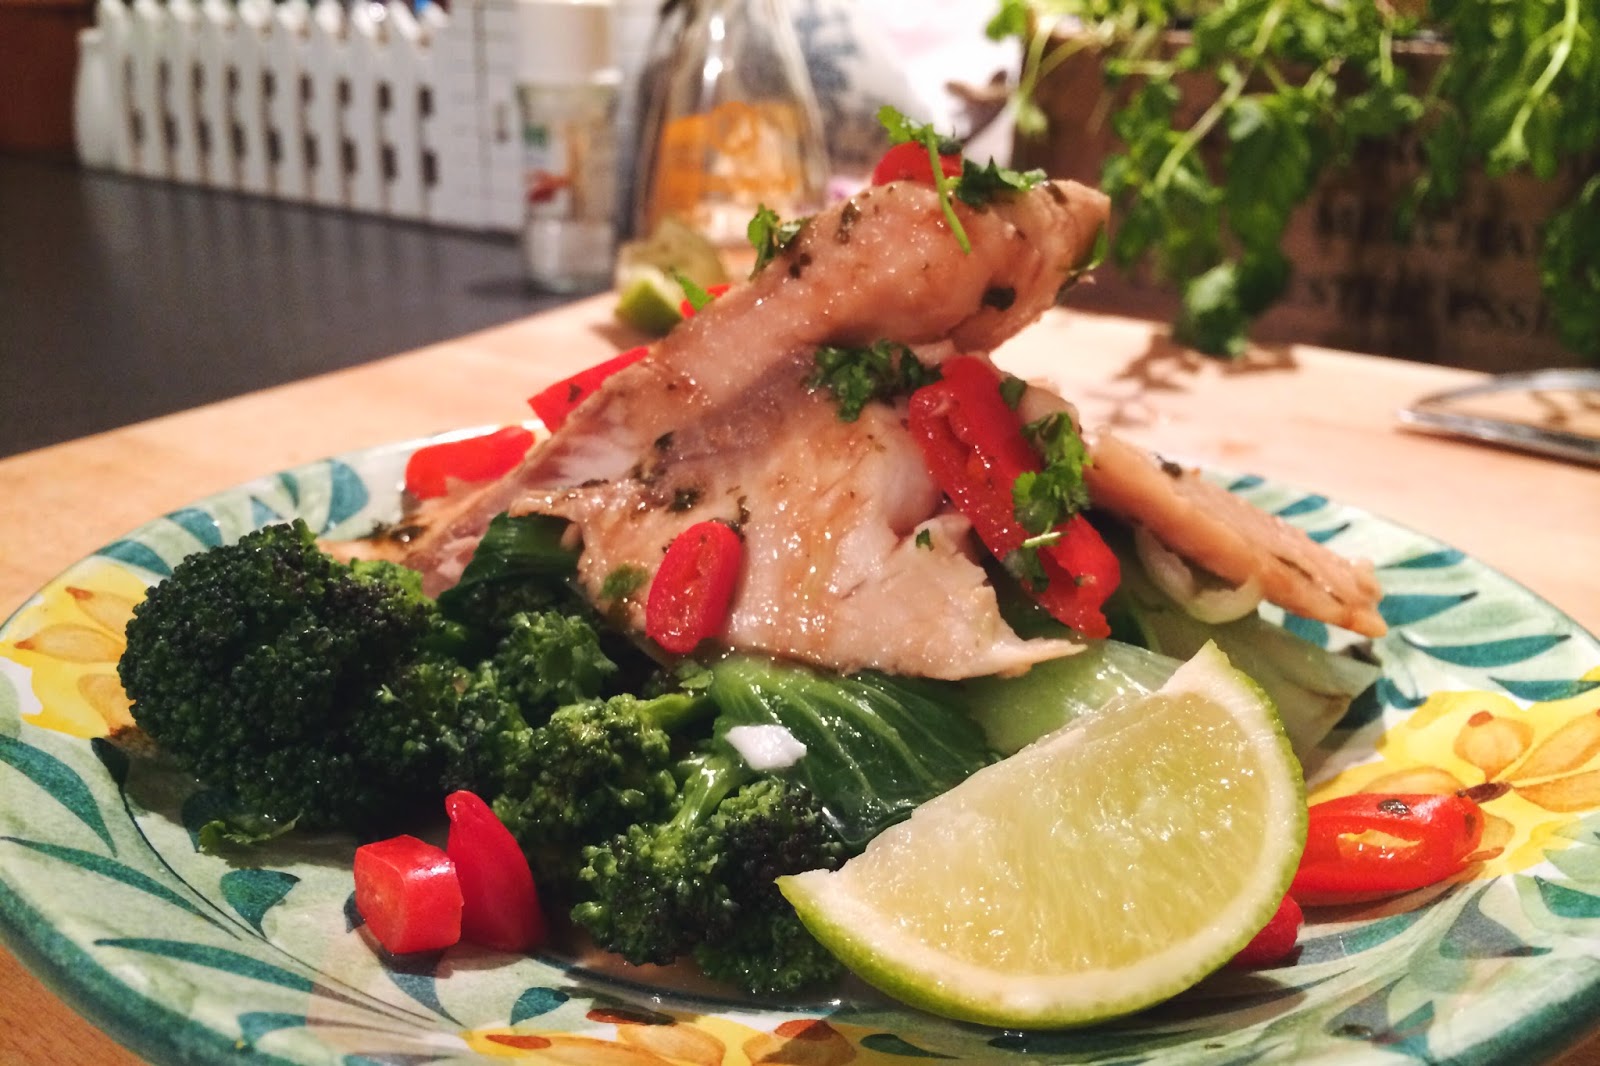 FashionFake, a UK fashion and lifestyle blog. FashionFake cooks is a series of easy, homemade recipes aimed to help cook delicious and healthy meals at home. Talapia fish fillets with chilli and lime.